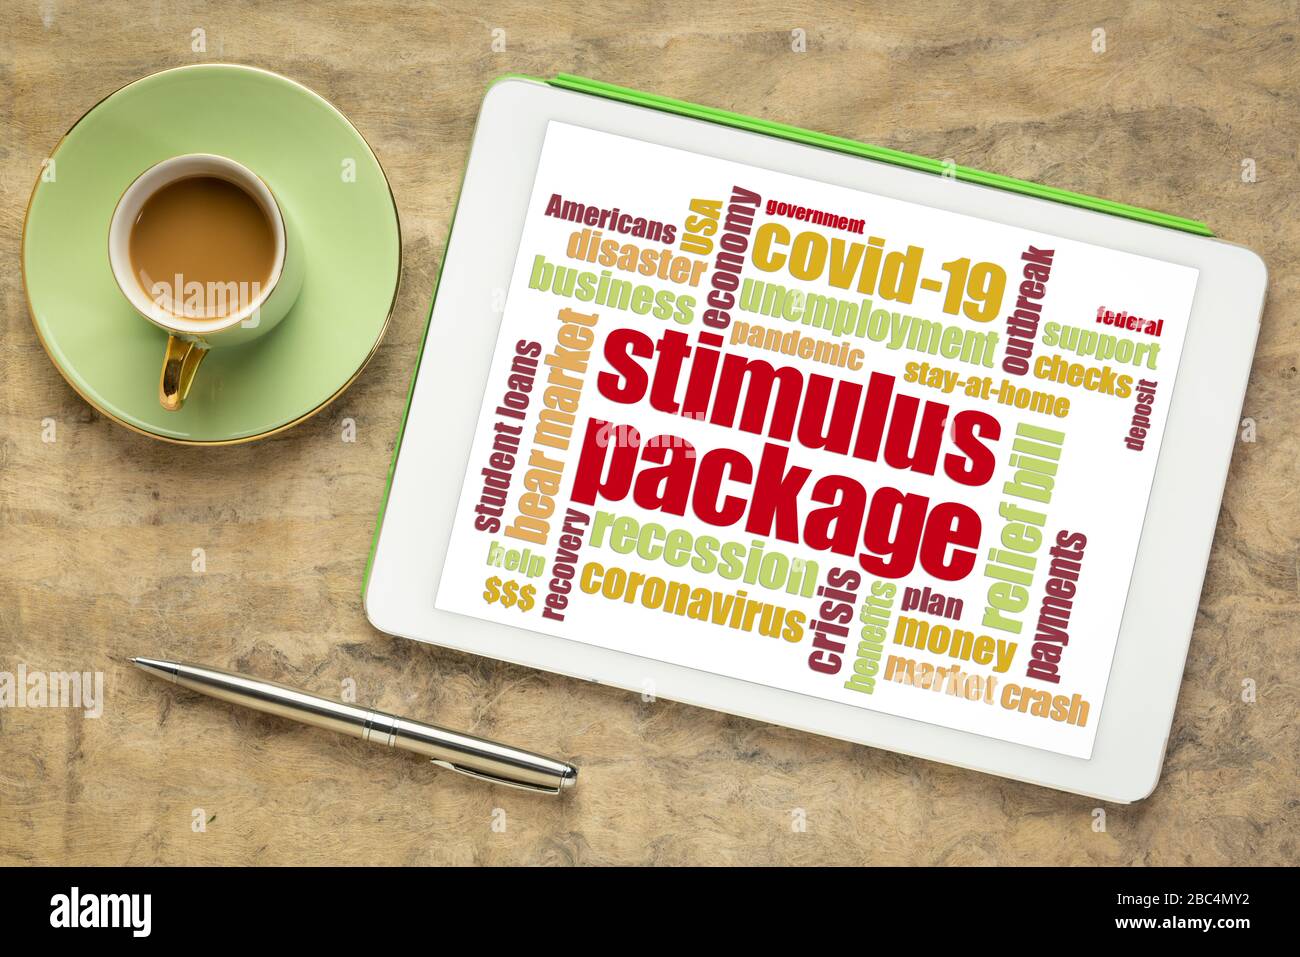 stimulus package word cloud on a digital tablet, relief bill during covid-19 coronavirus pandemic concept Stock Photo